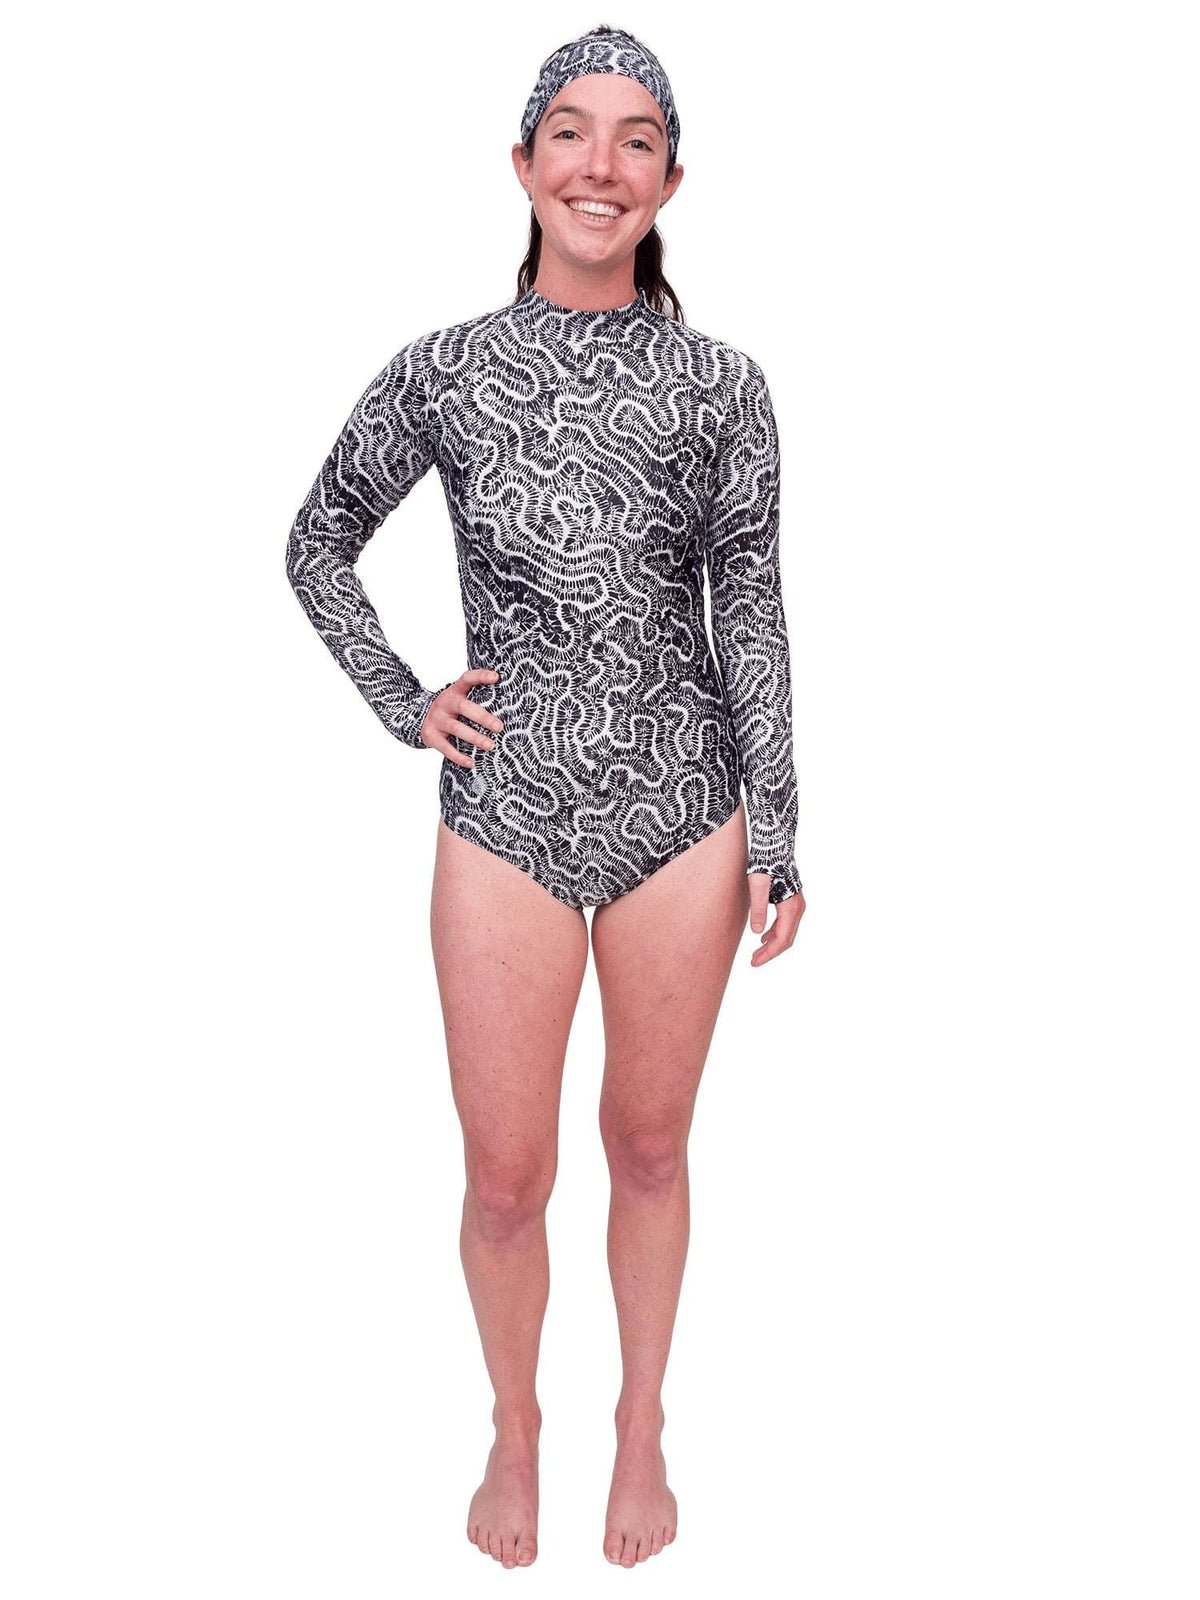 Model: Maddie is the Program &amp; Outreach Director at Debris Free Oceans and a restoration ecology educator. She is 5&#39;8&quot;, 135lbs, and is wearing a size M.